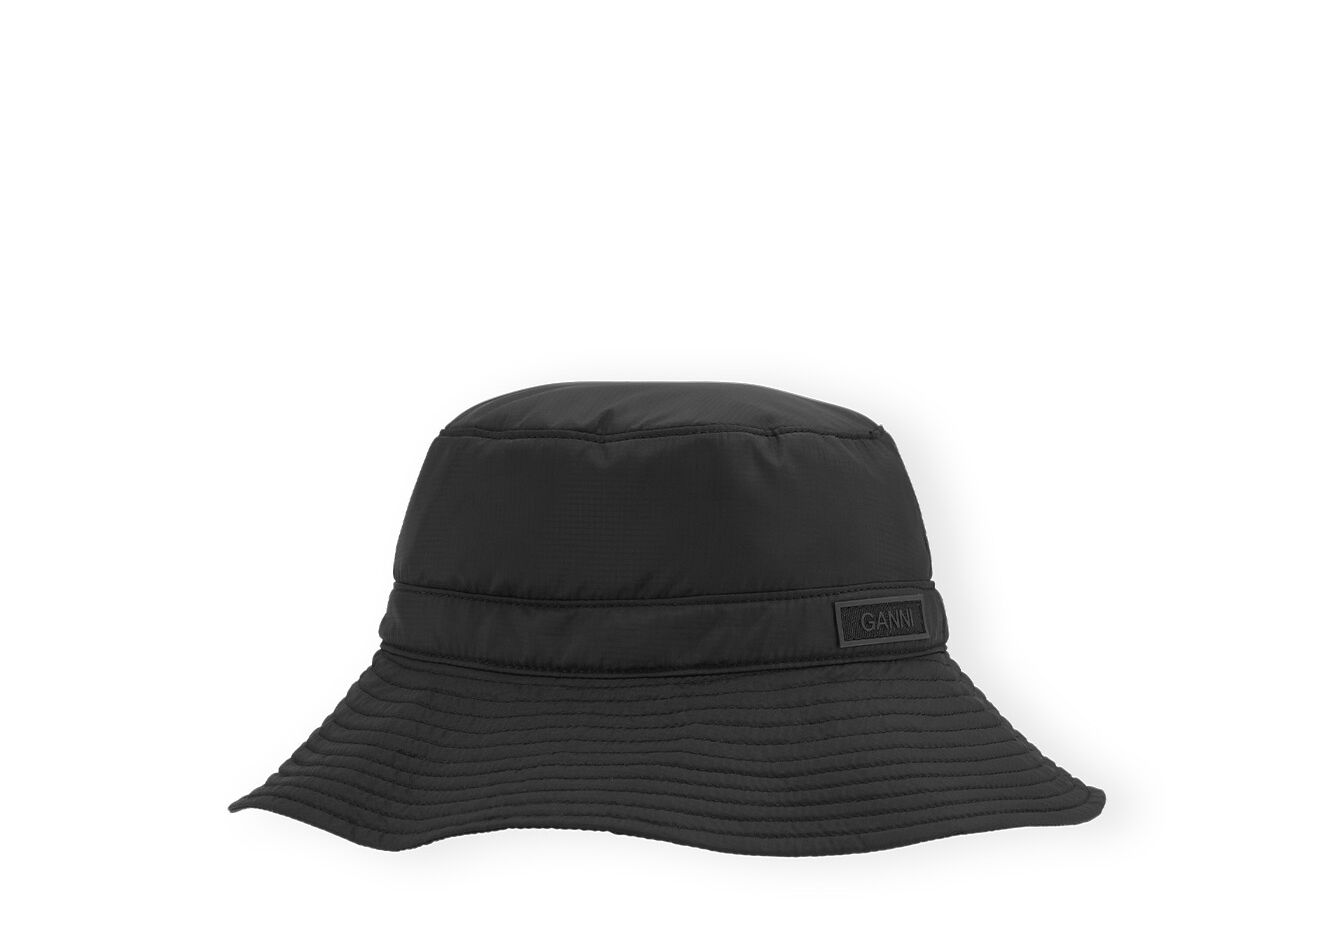 Black Tech Bucket Hat, Recycled Polyester, in colour Black - 1 - GANNI